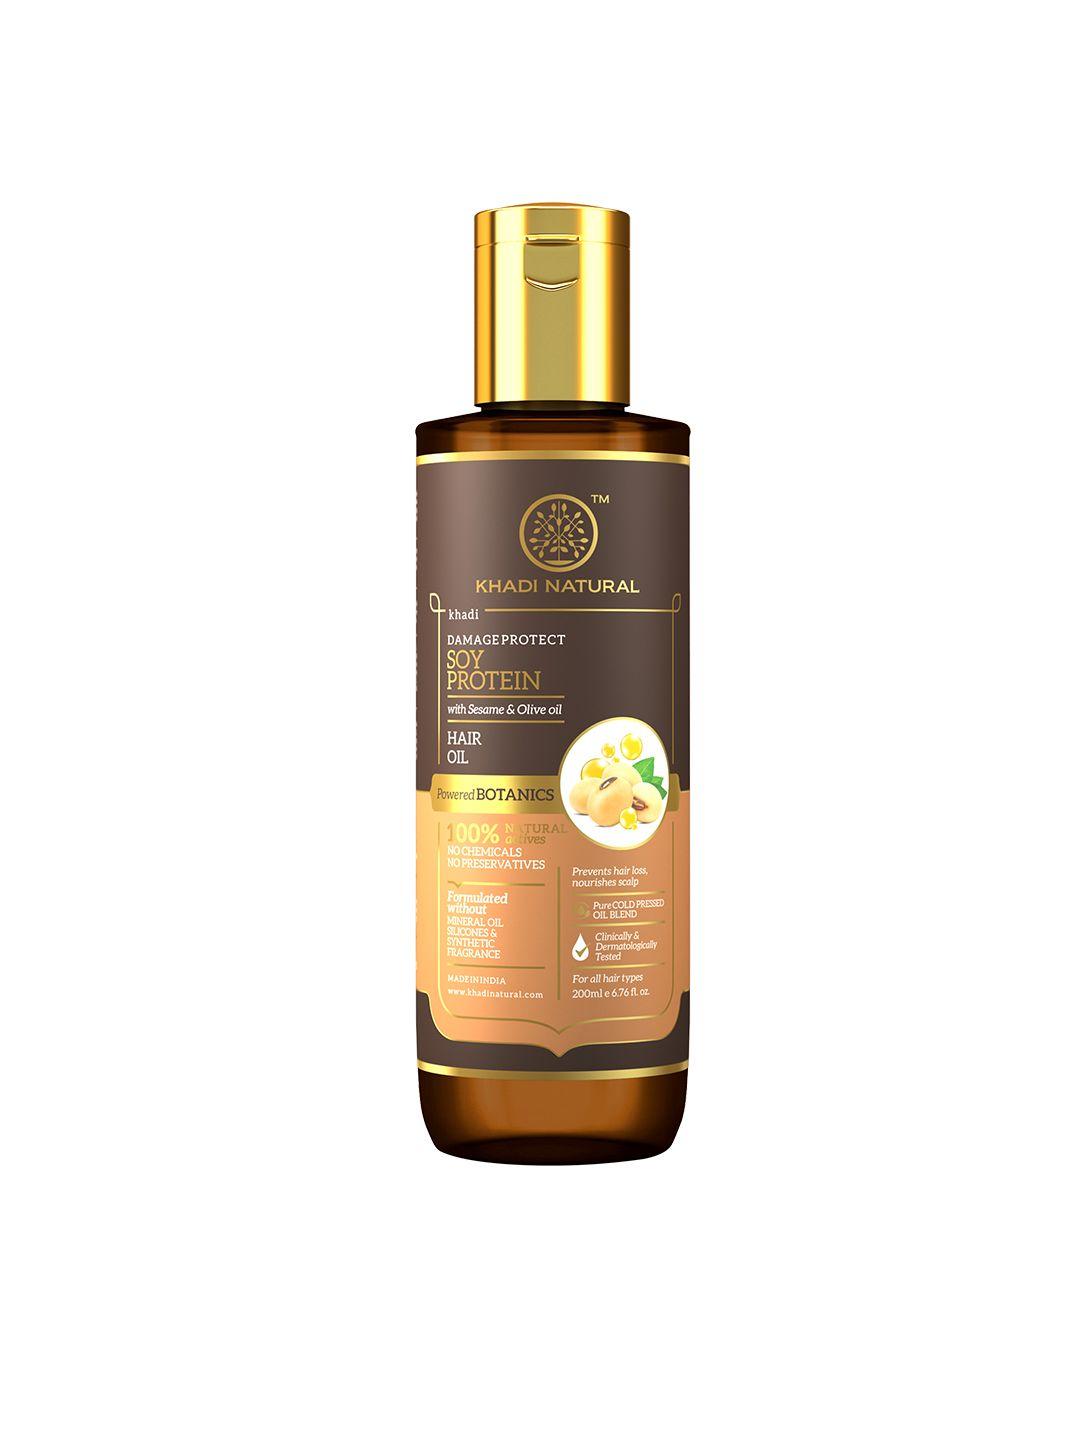 khadi natural damage protect soy protein hair oil with sesame & olive oil - 200 ml